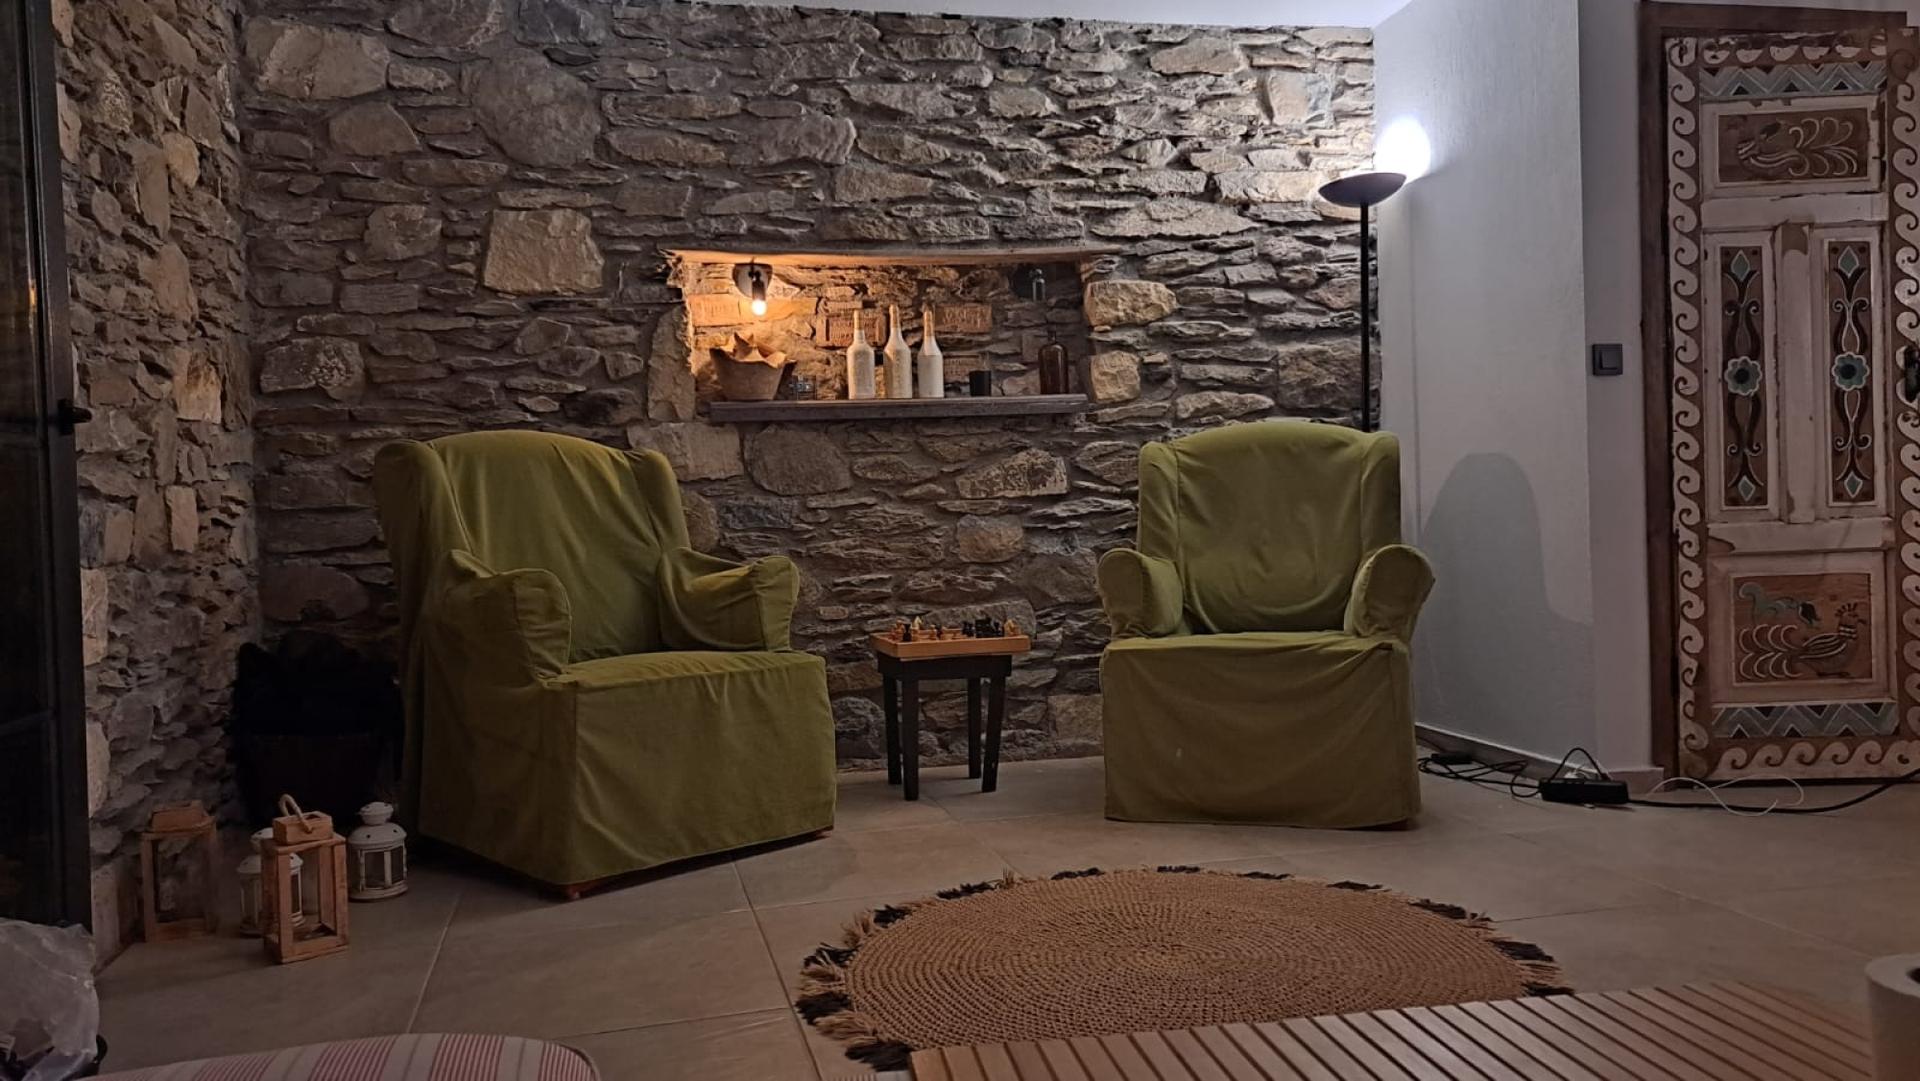 Authentic living room with stone walls will color your conversations.